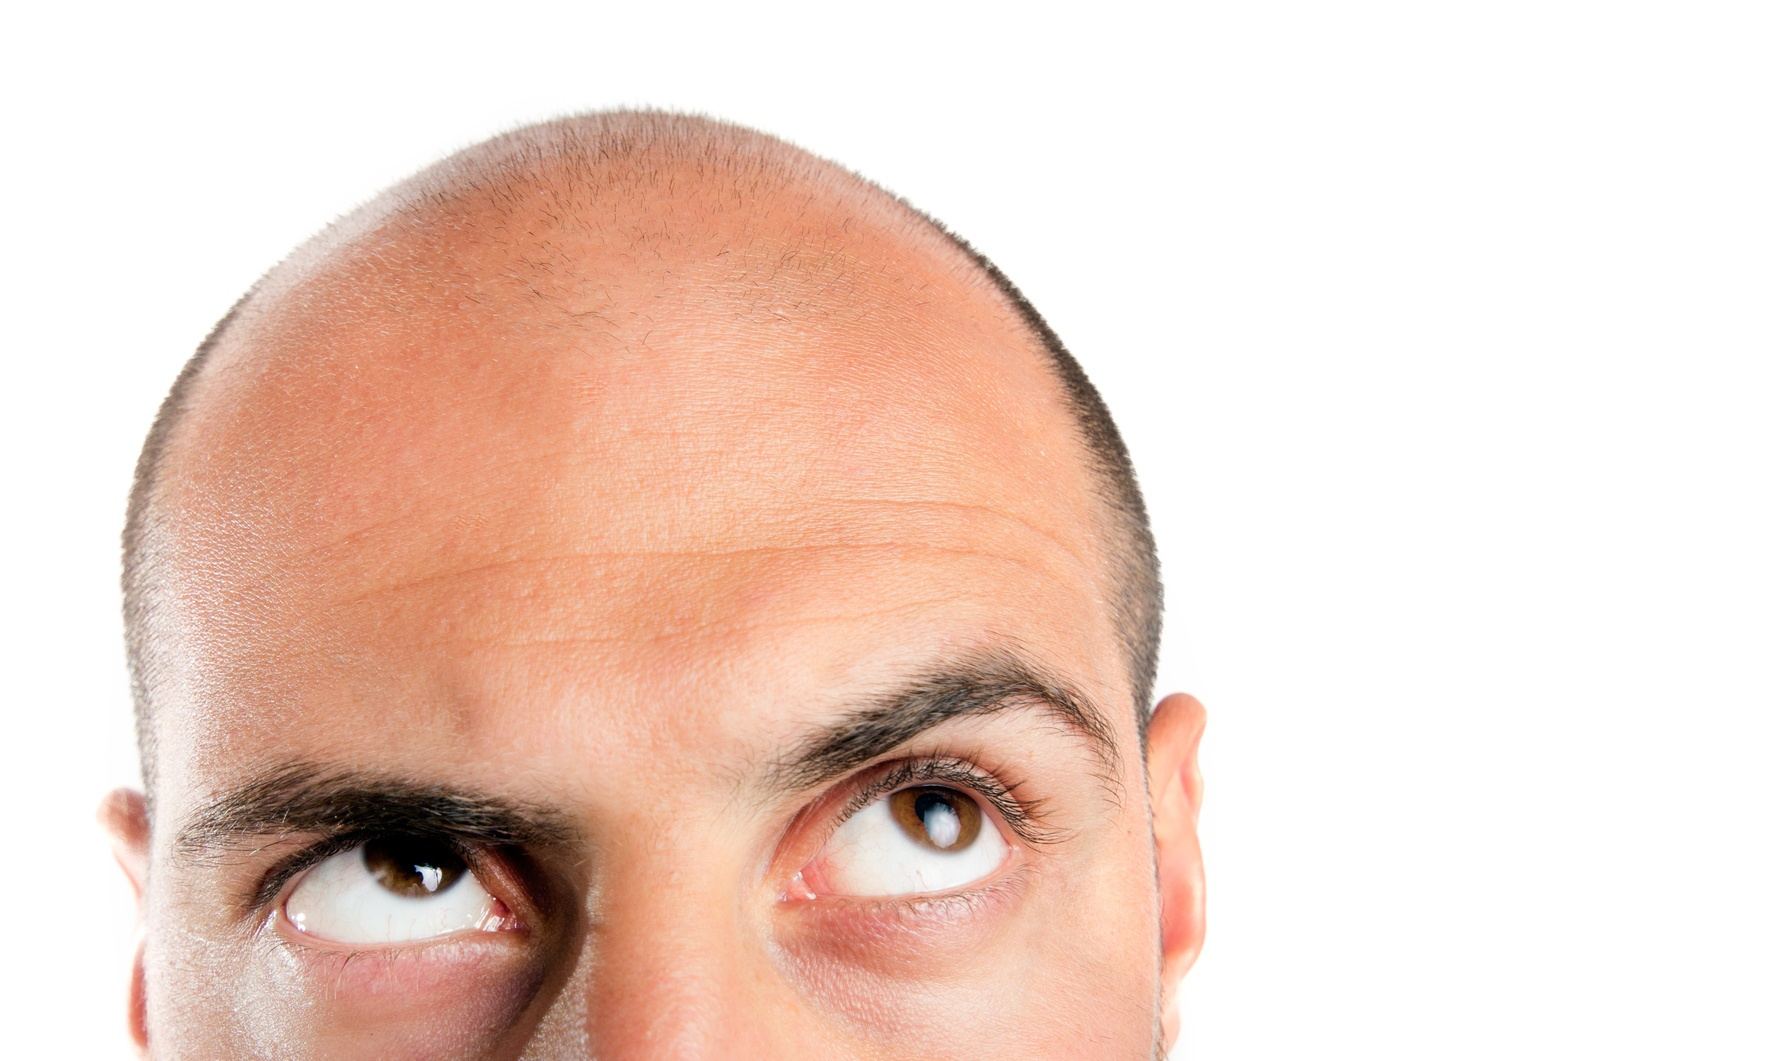 Considering getting temporary scalp micropigmentation for your bald head?